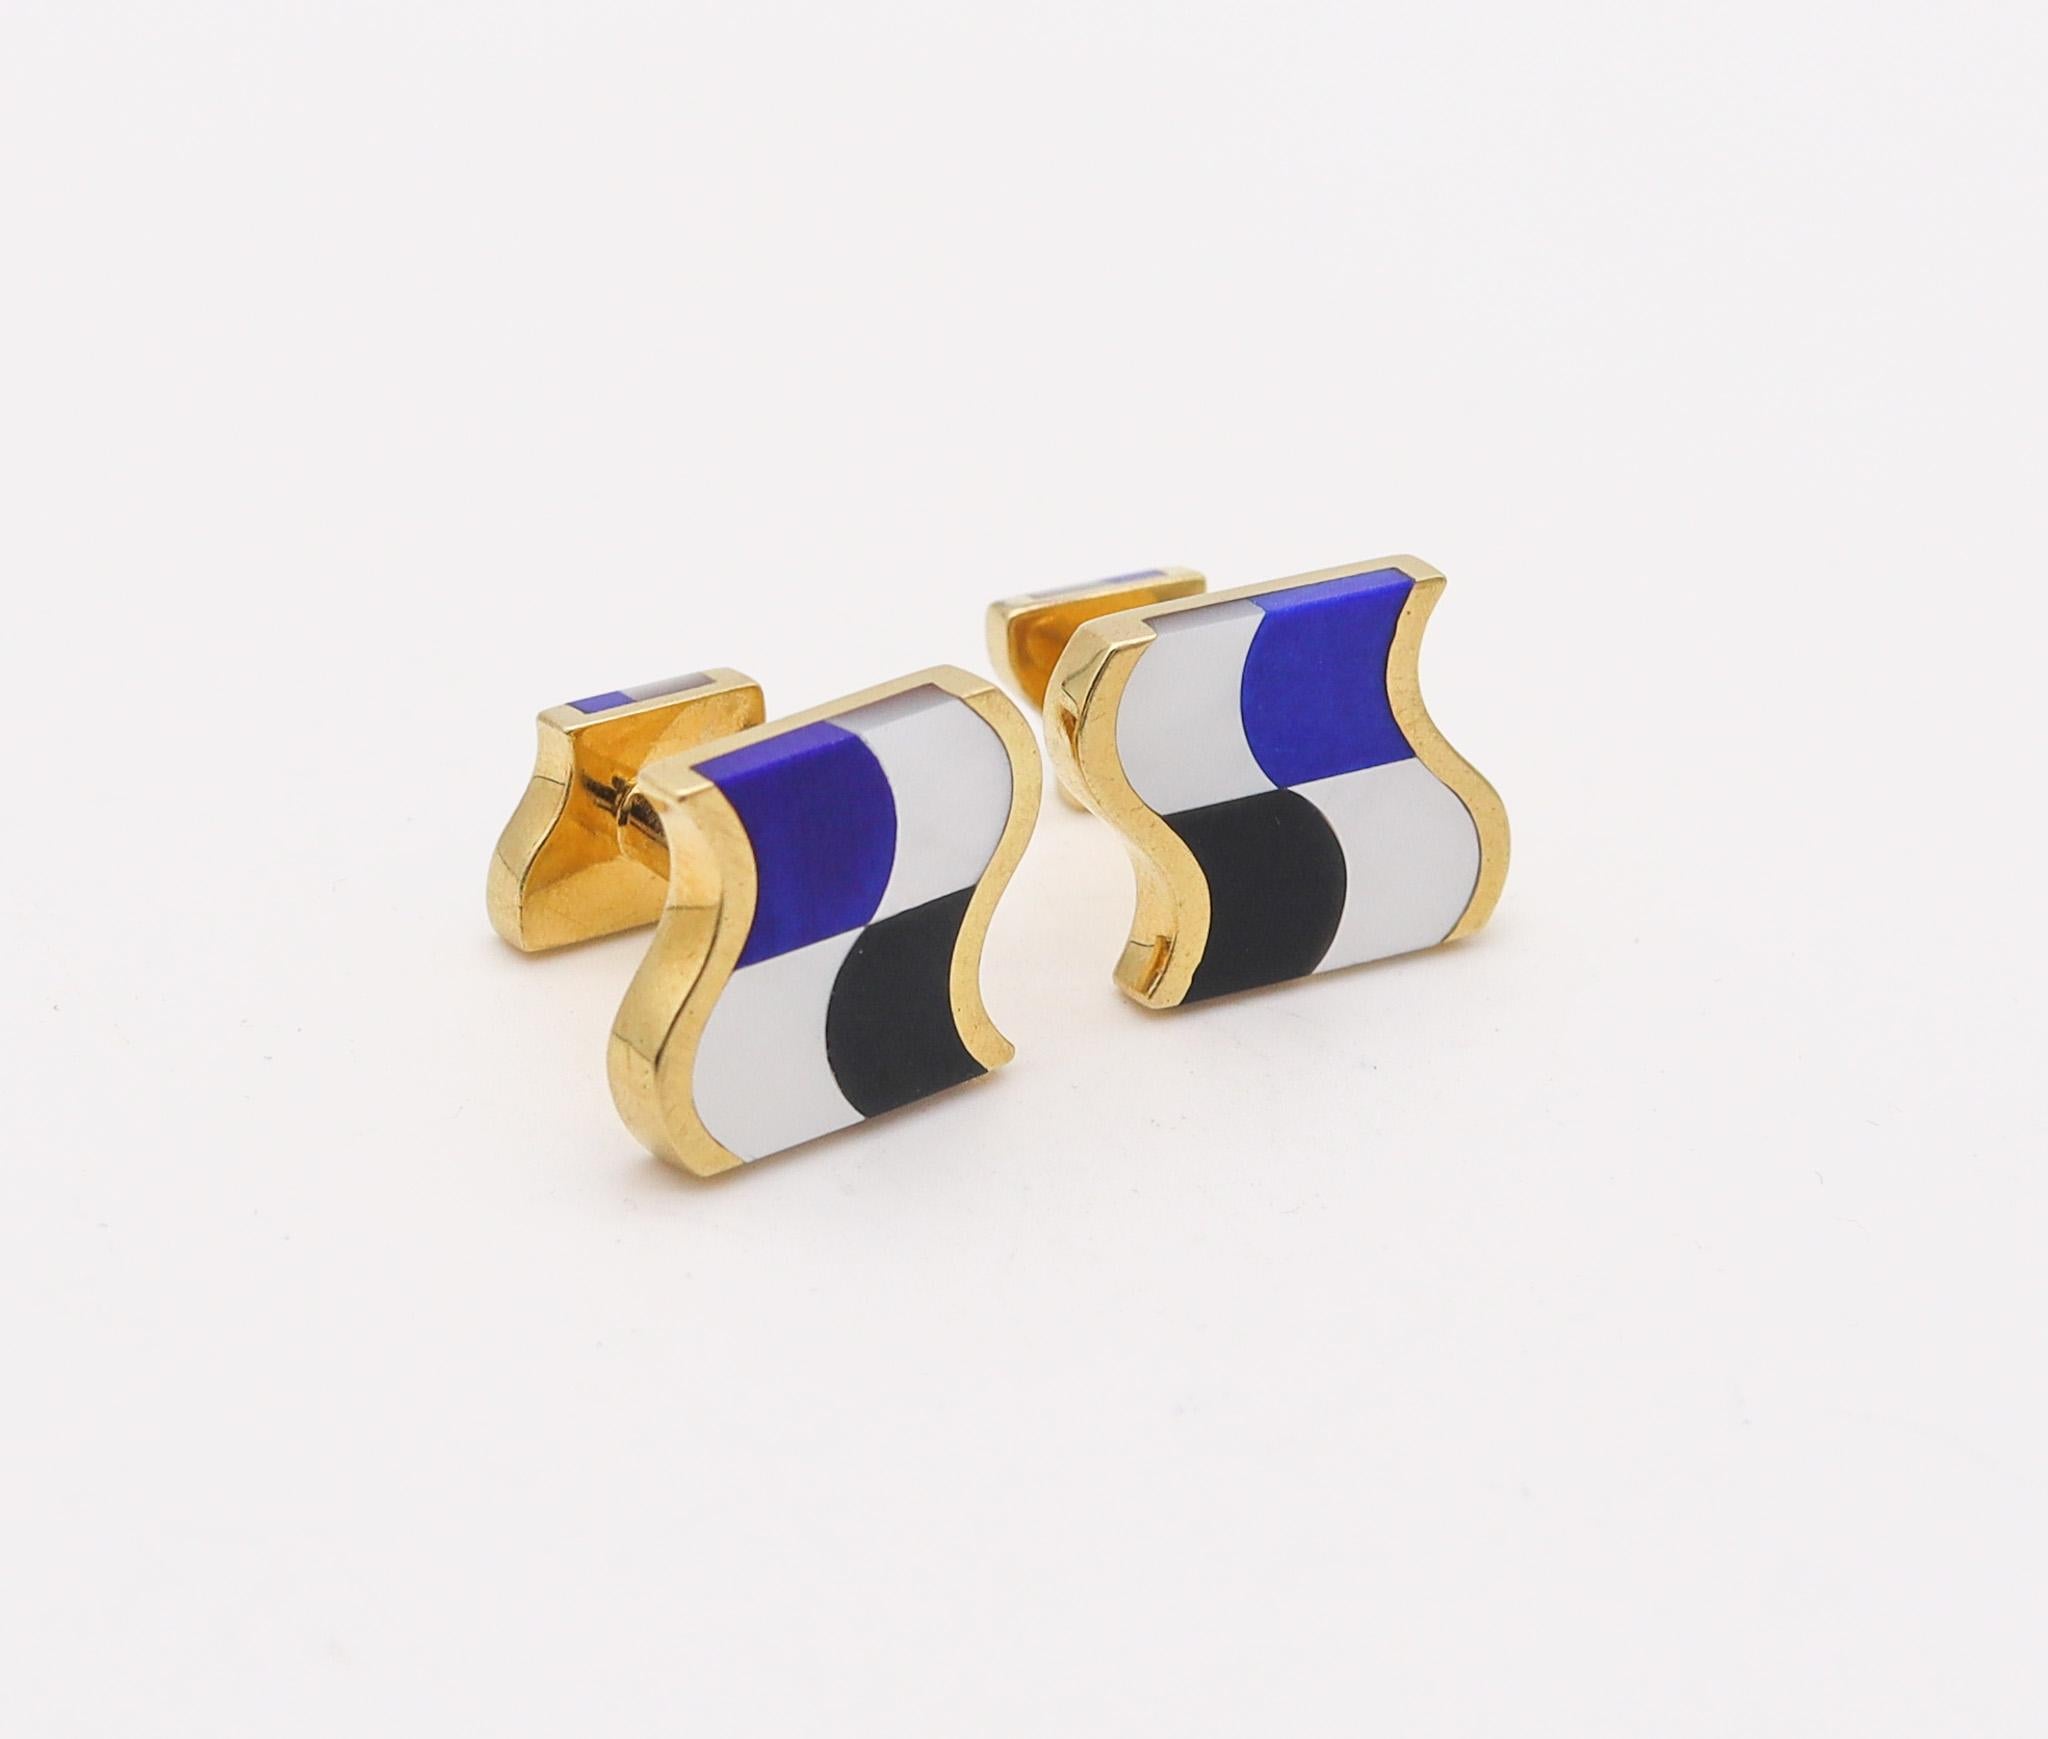 Mixed Cut Tiffany & Co 1980 Angela Cummings Cufflinks In 18Kt Gold With Gemstones For Sale